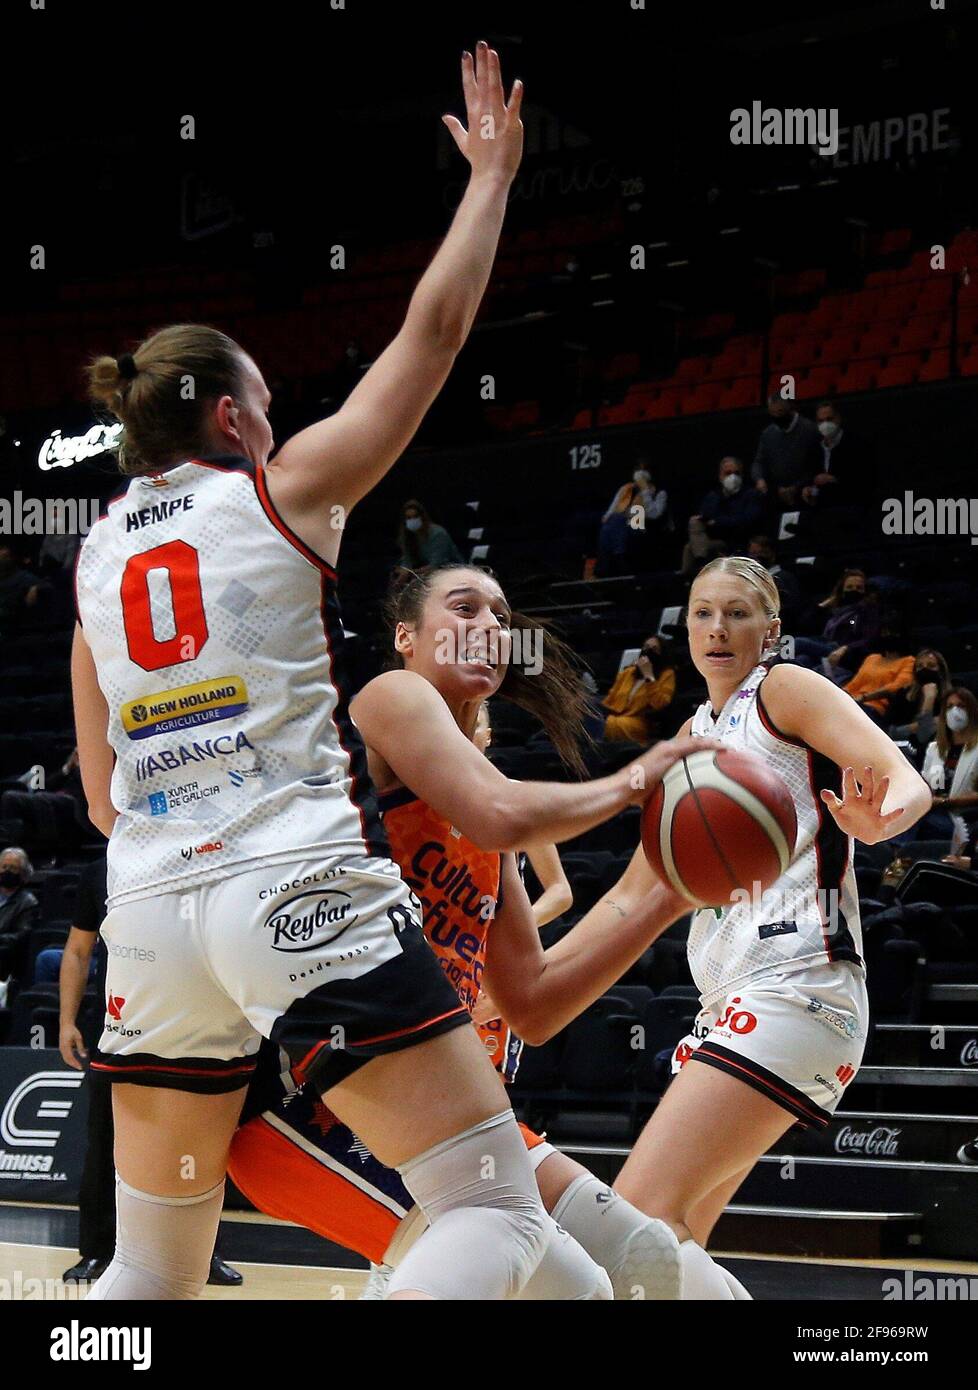 Valencia Basket's player Raquel Carrera (C) in action during the basketball  game against Duran Maquinaria Ensino at Fuente de San Luis pavilion, in  Valencia, eastern Spain, 16 April 2021. Carrera was drafted